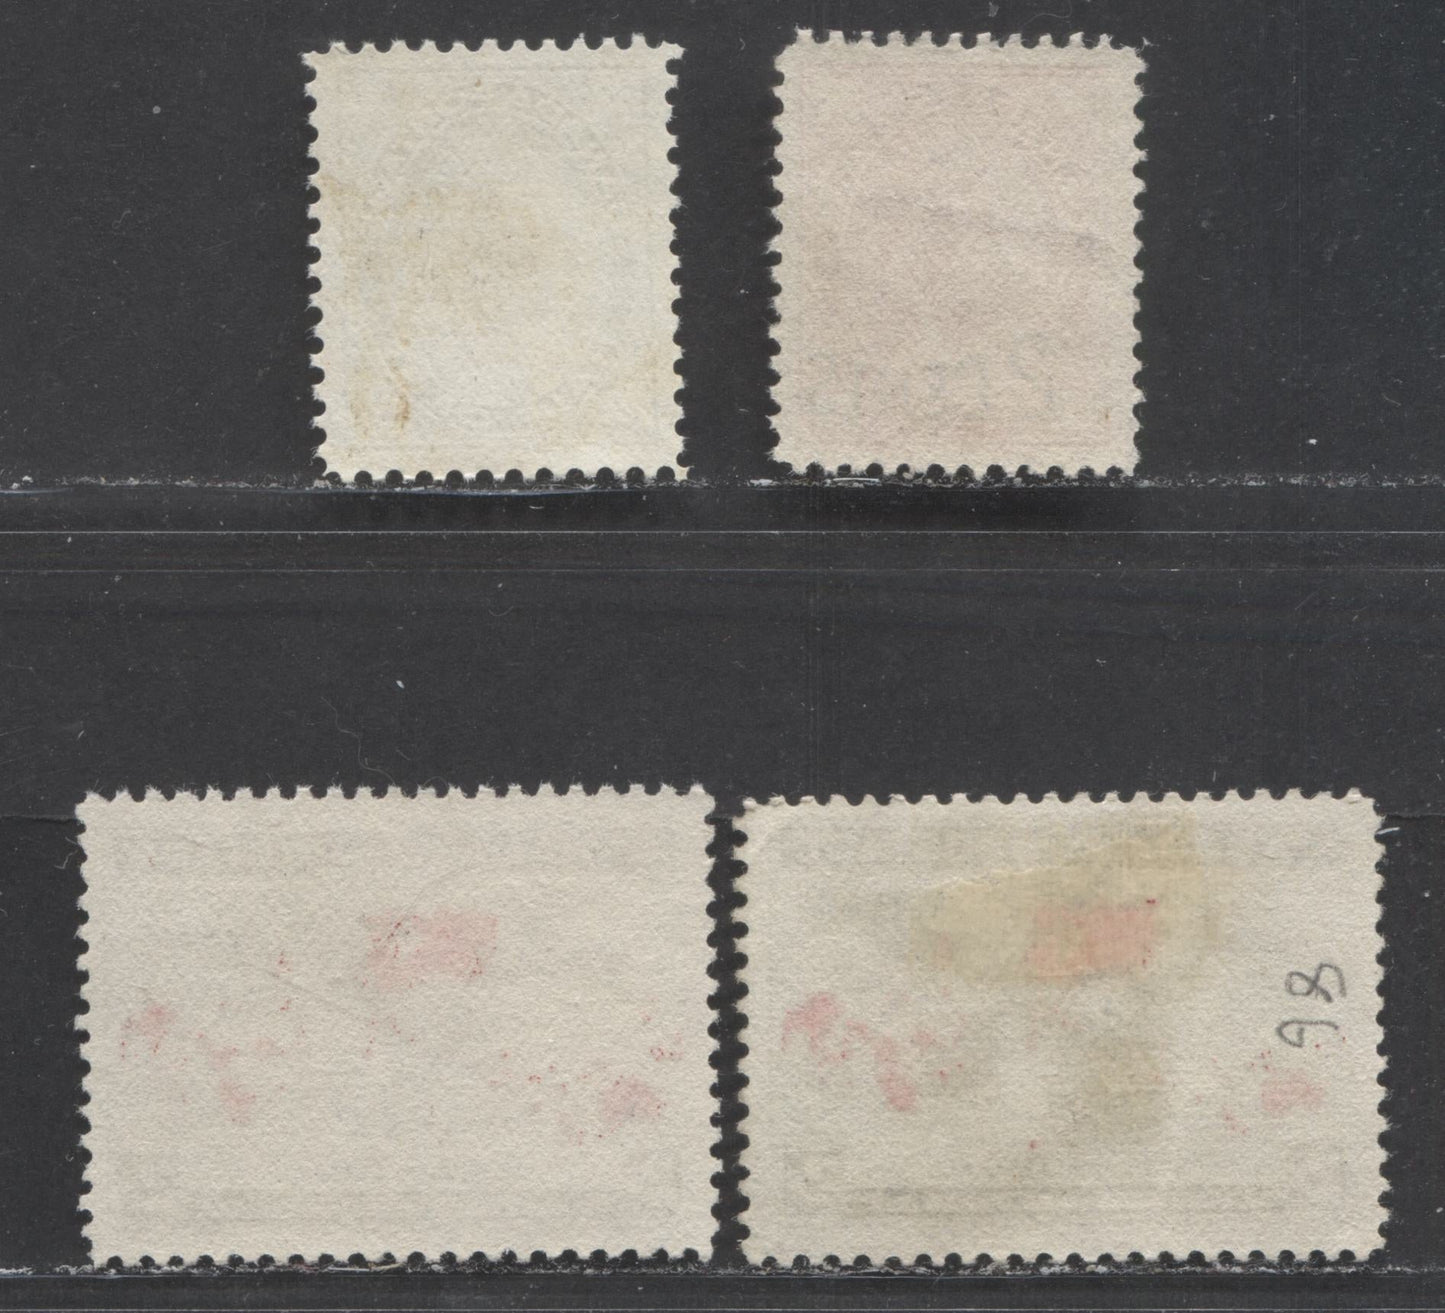 Lot 97 Canada #66, 85, 86b, 88 1/2c - 2c on 3c Black - Carmine Queen Victoria & Mercator's Projection, 1897-1899 Various Issues, 4 Very Fine Unused Singles